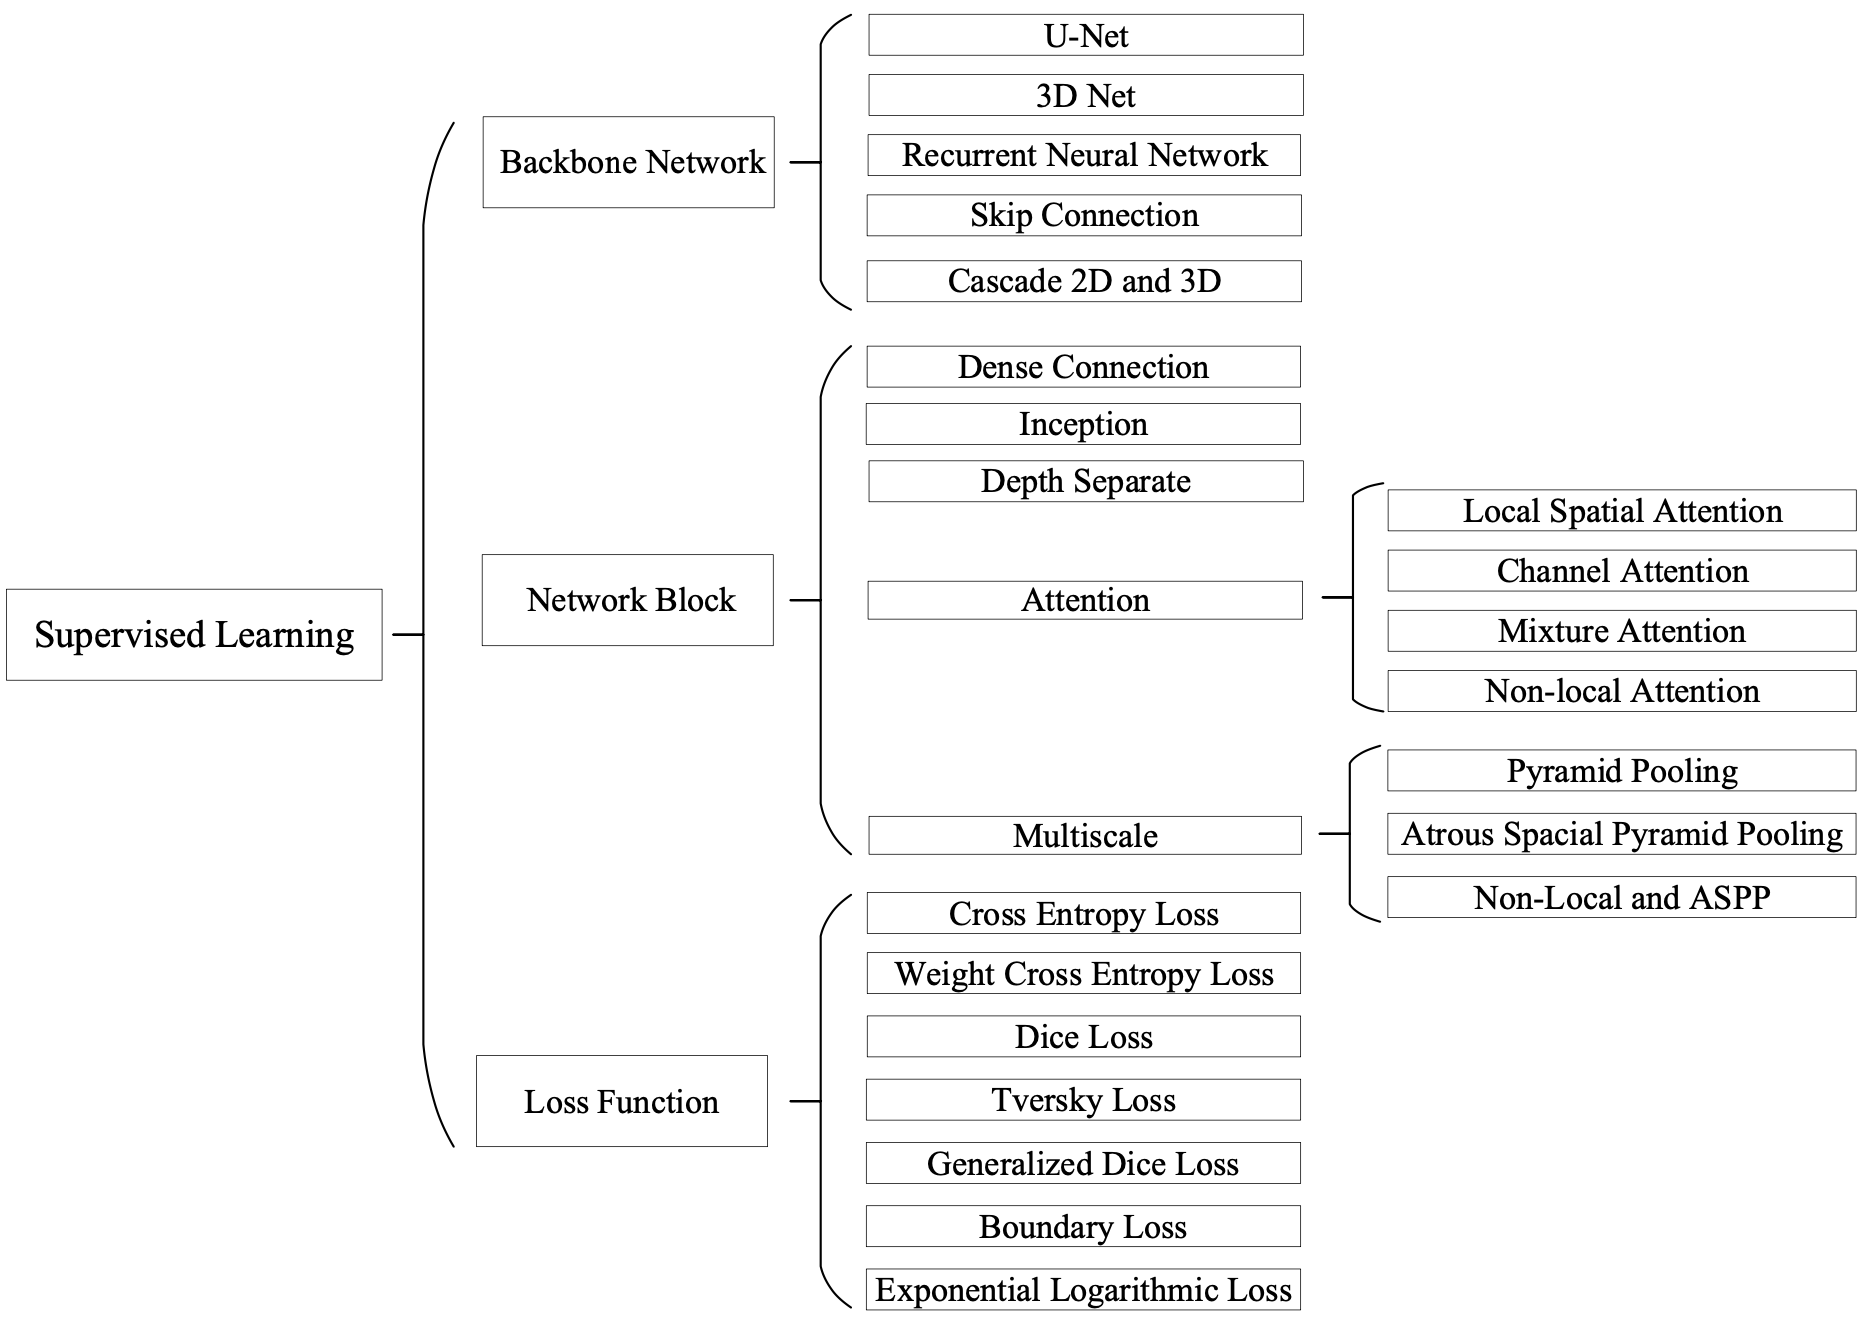 Fig. 2. An overview of network architectures based on supervised learning.